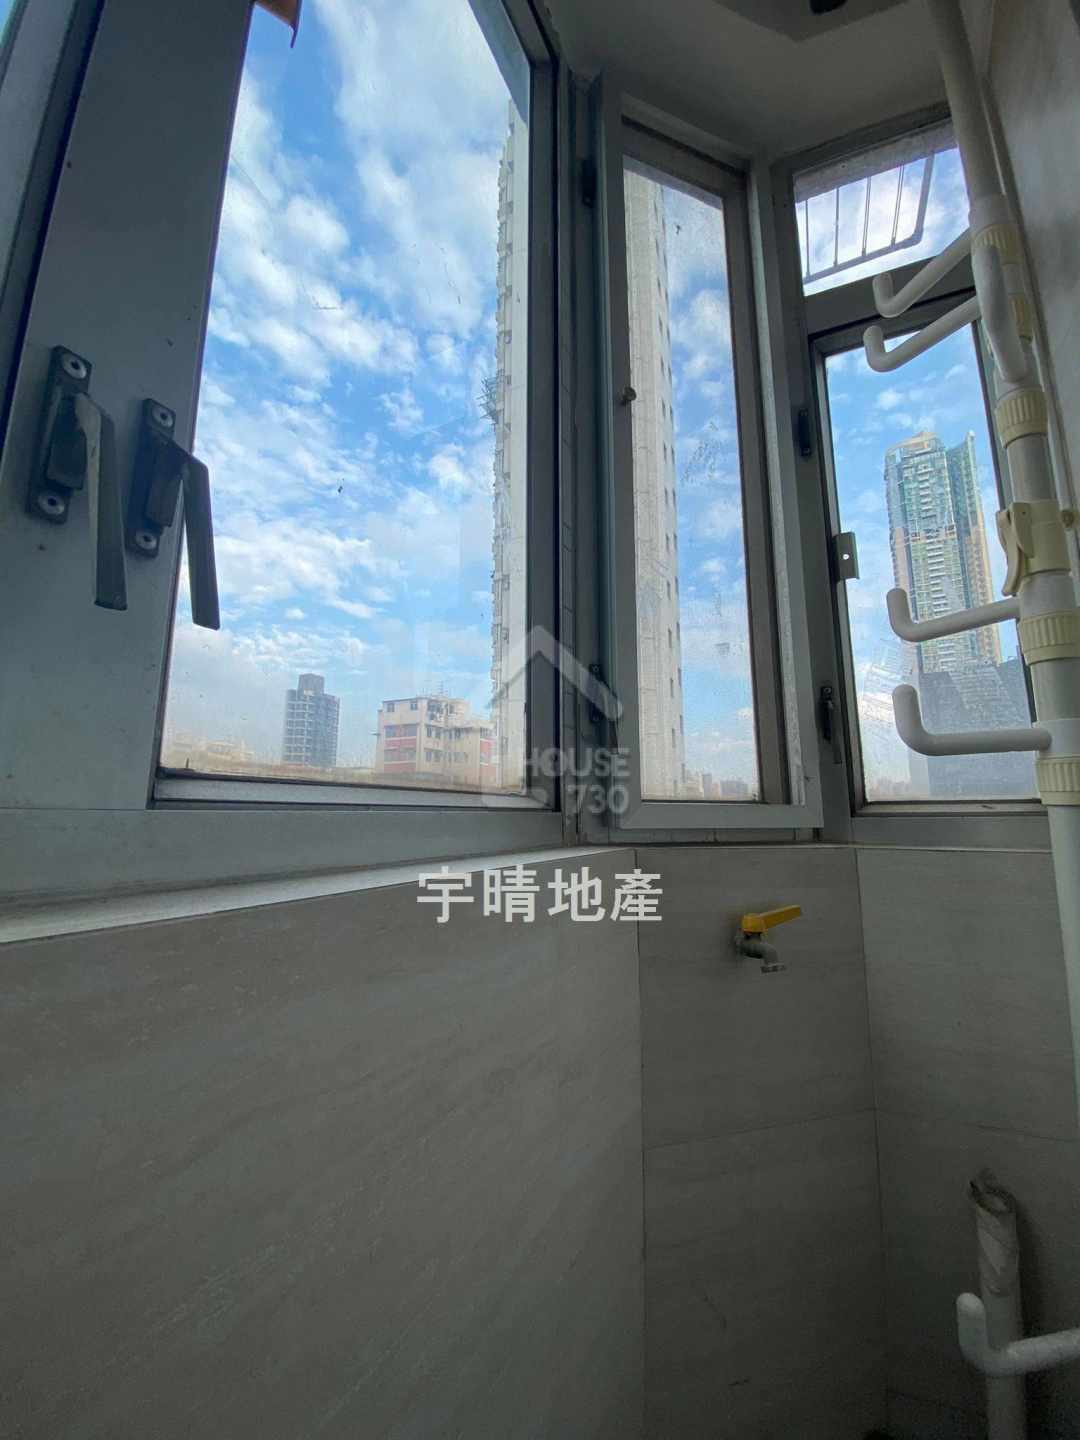 Sham Shui Po GRACIOUS MANSION Upper Floor View from Living Room House730-6553668